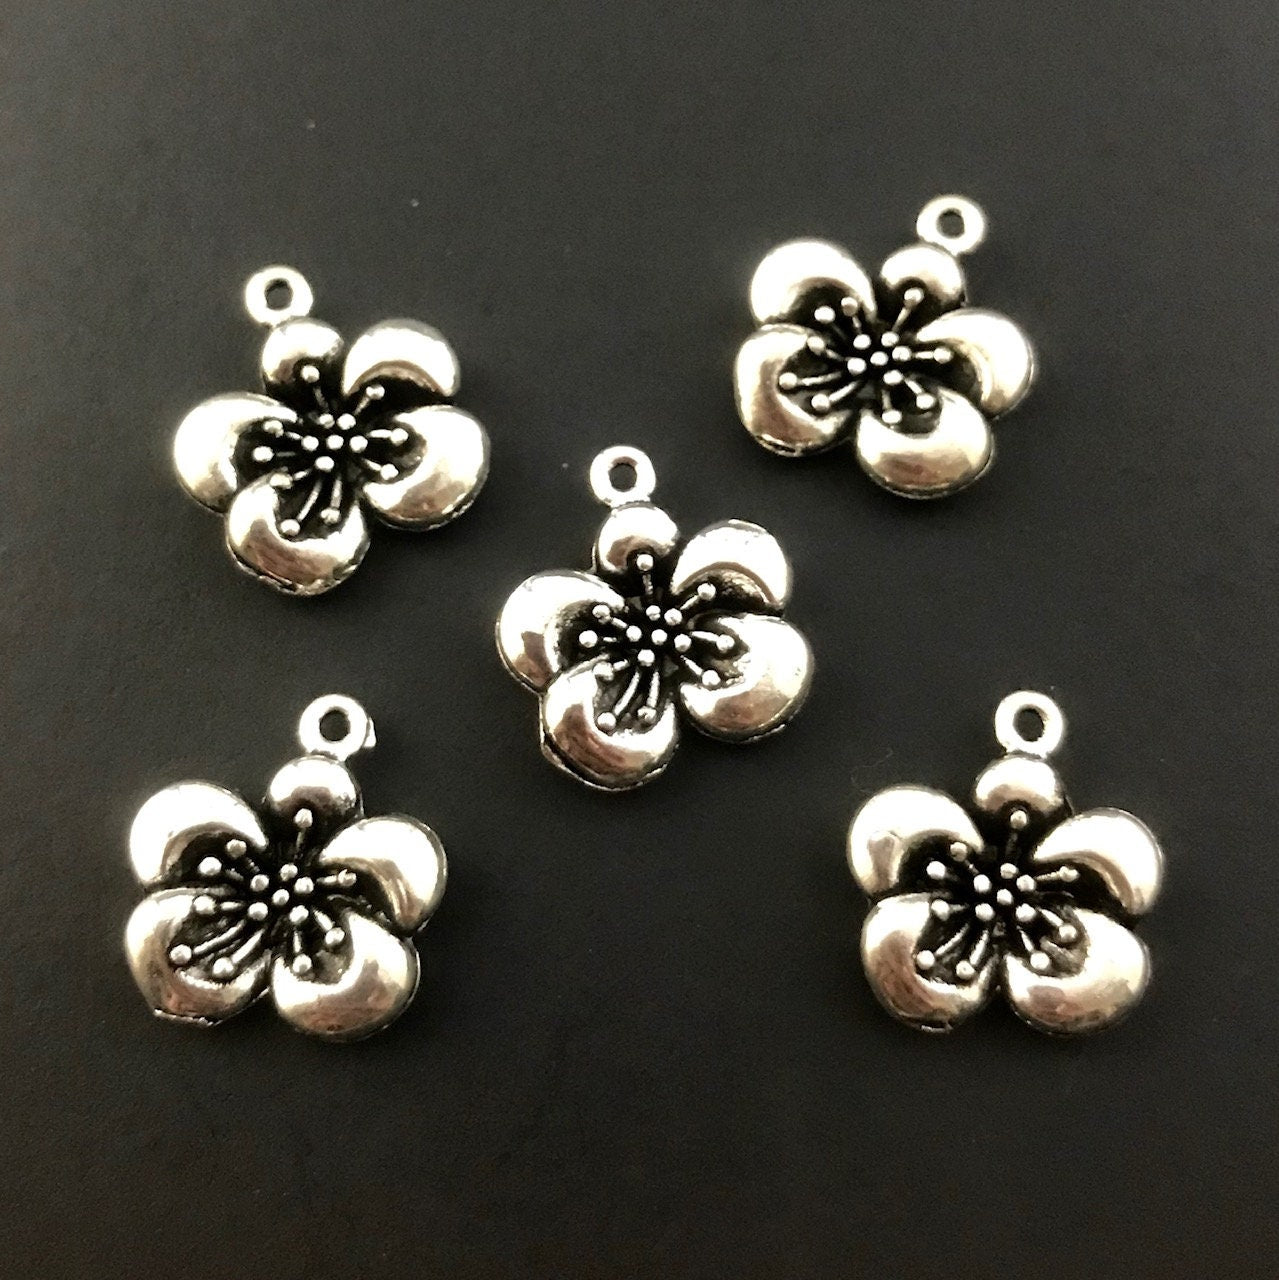 10 Hibiscus Flower Charms - 3D - Antique Silver